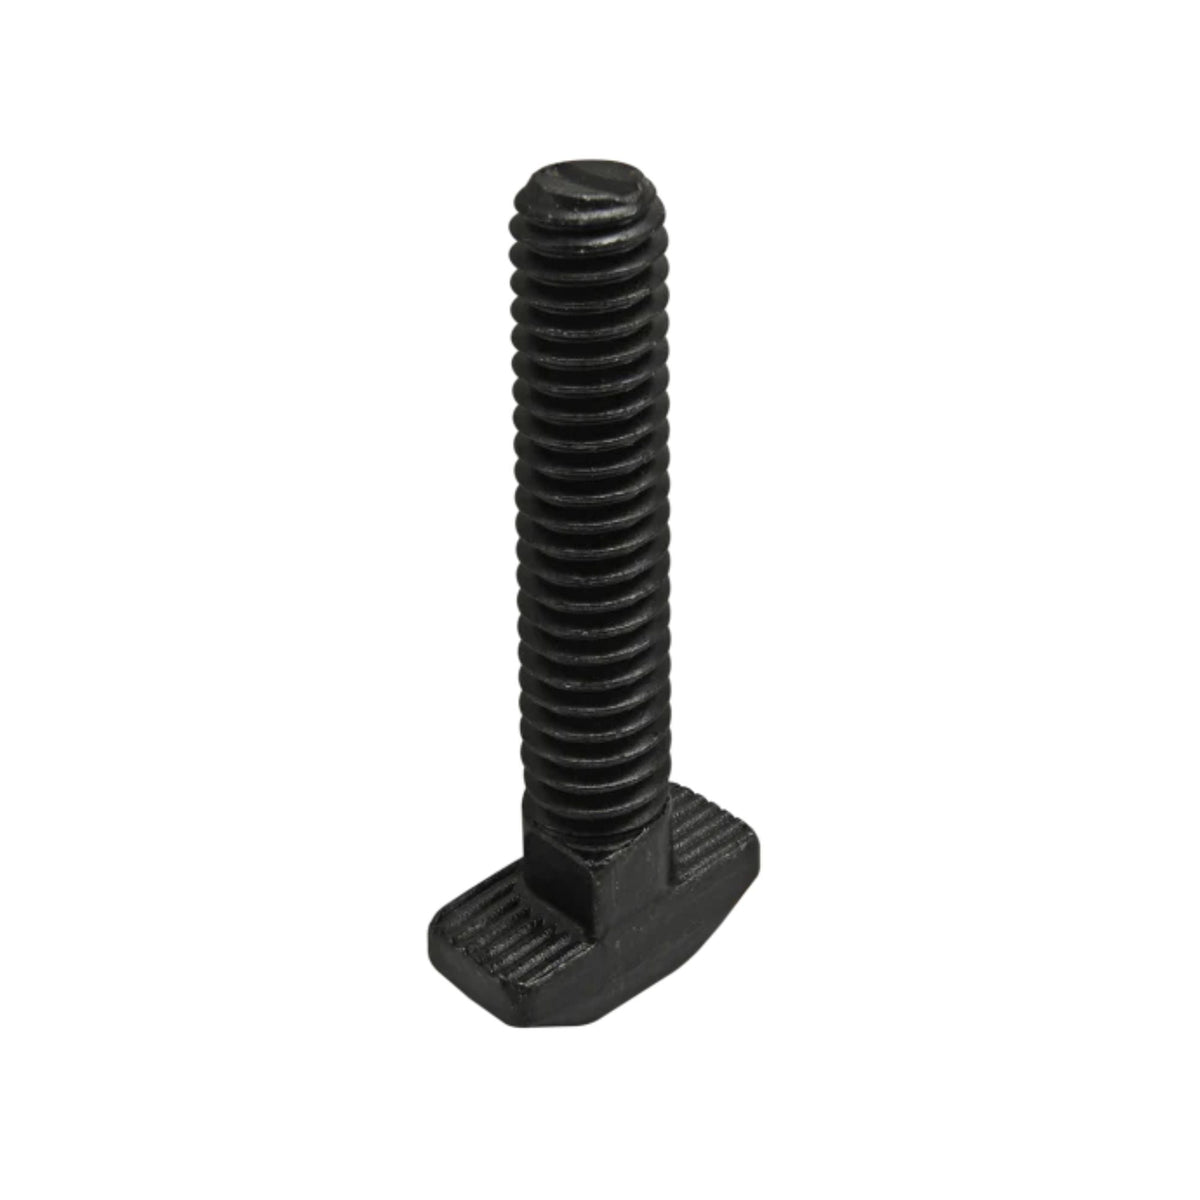 black t-slot stud with a rectangular base and a long threaded stem pointing upward